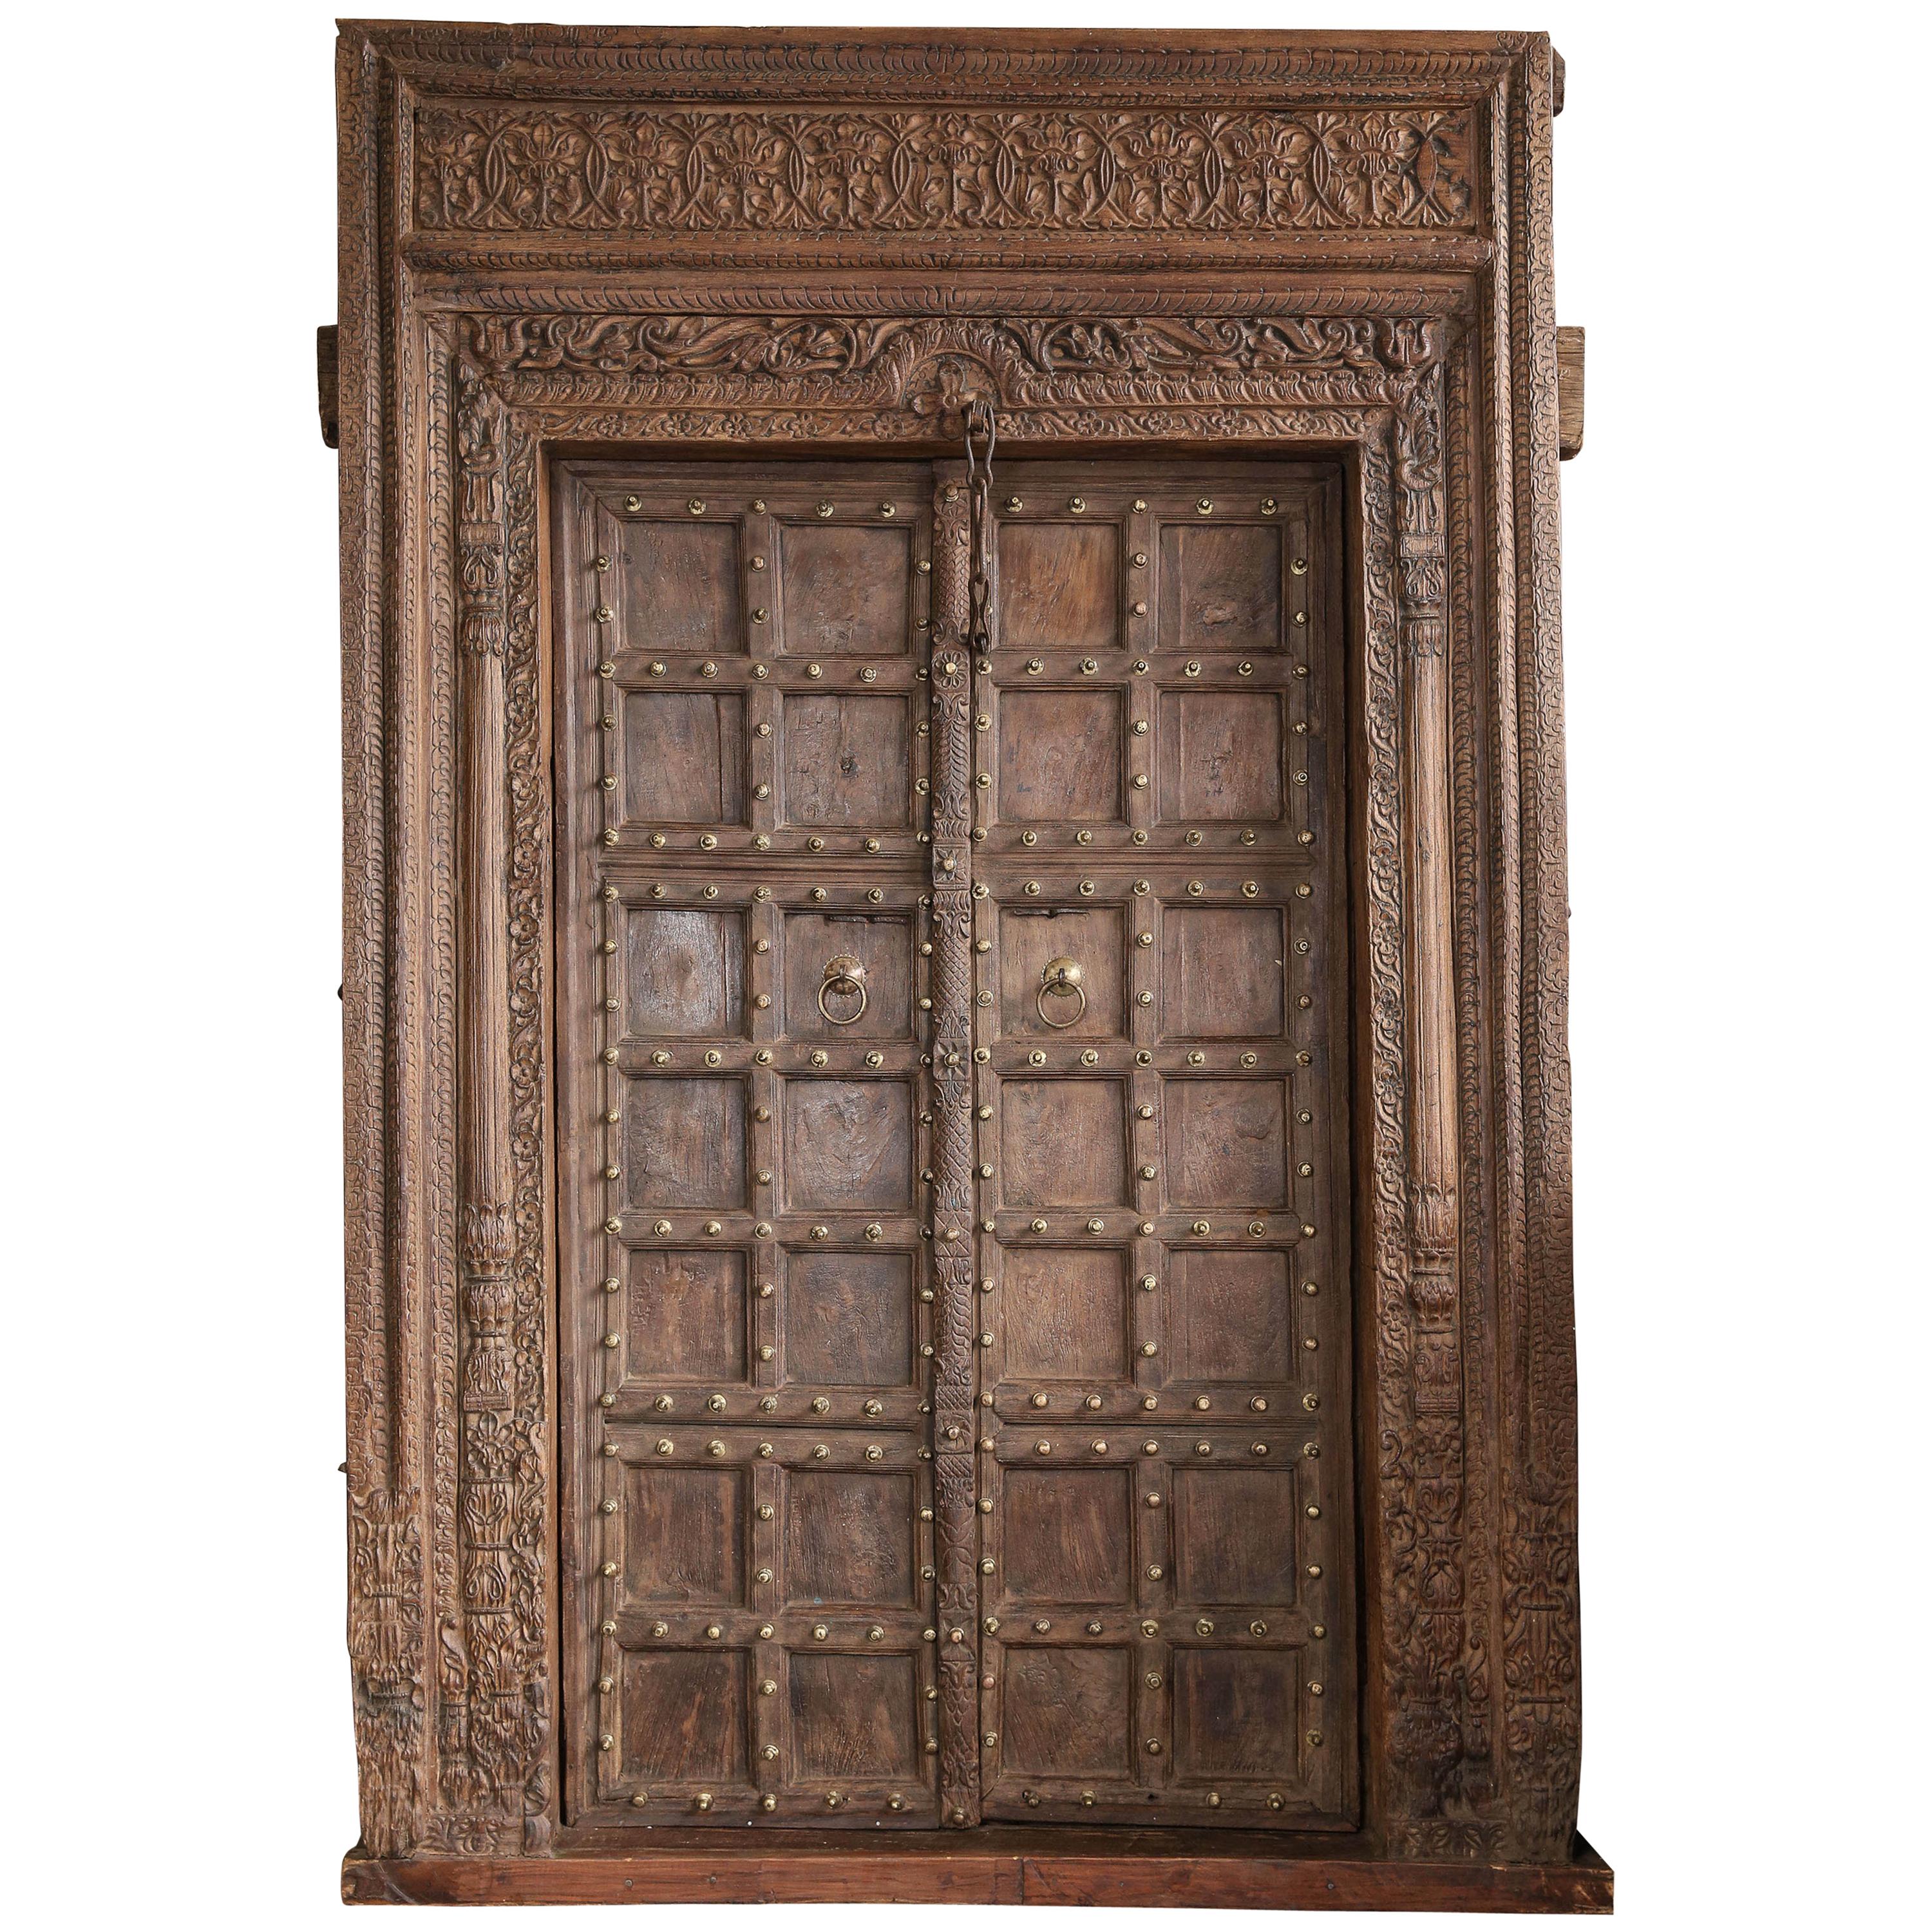 200 Years Old Highly Carved Metal Studded Grand Entry Door from a Mansion